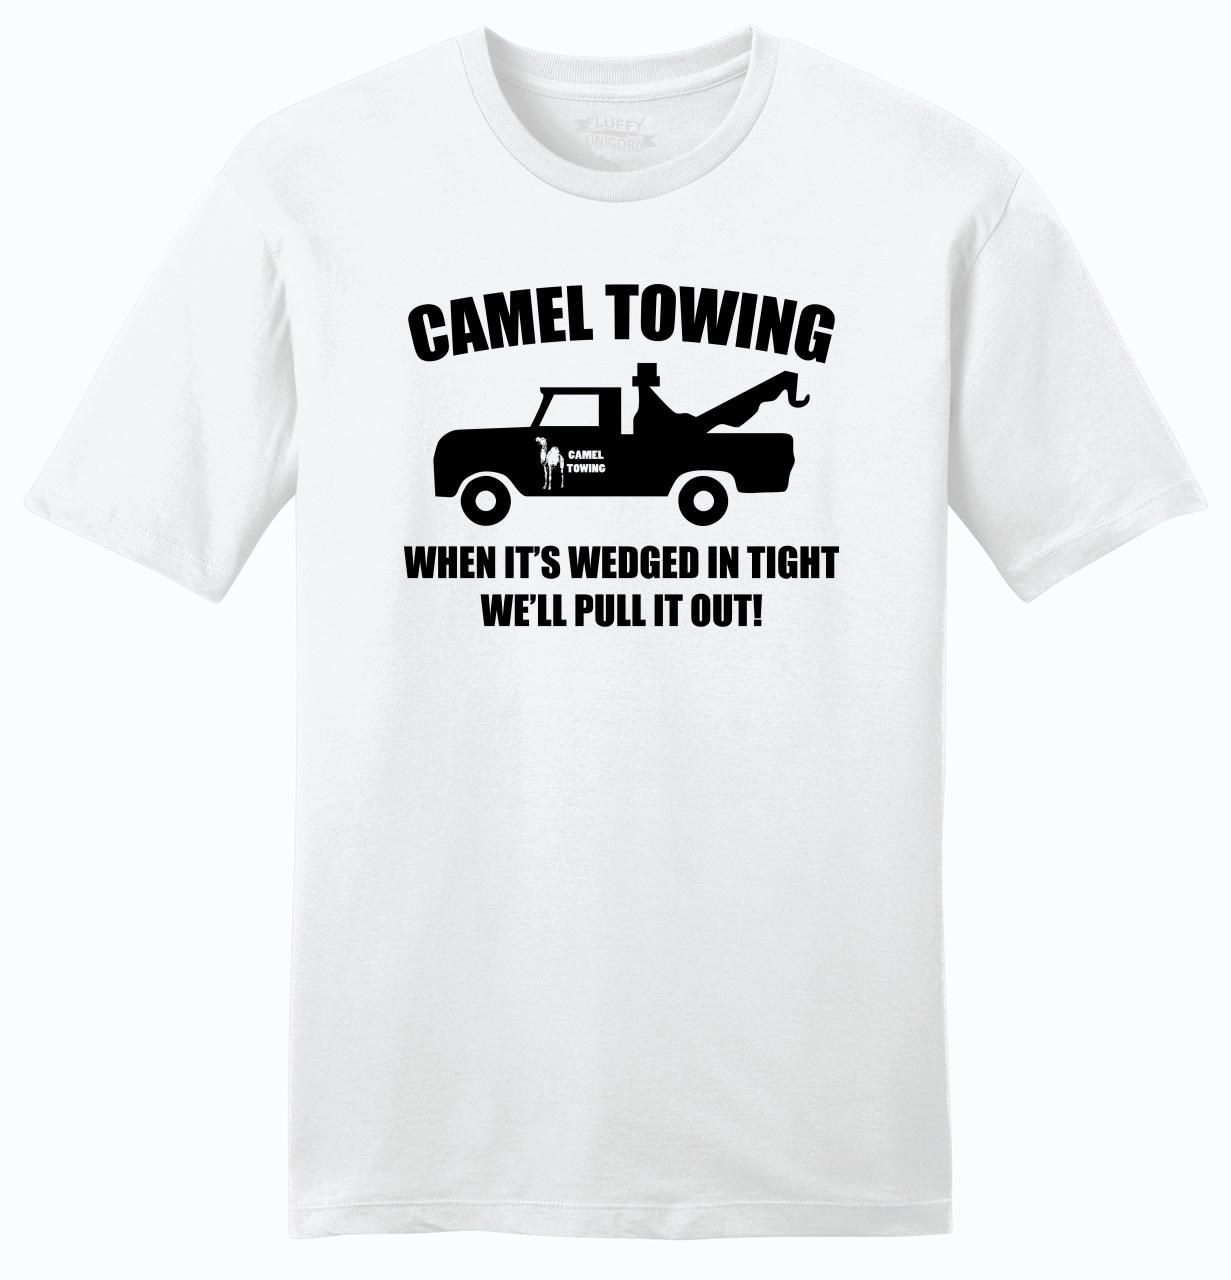 Camel Towing Funny Mens Soft Shirt Adult Humor Rude Truck Tow Sex Tee